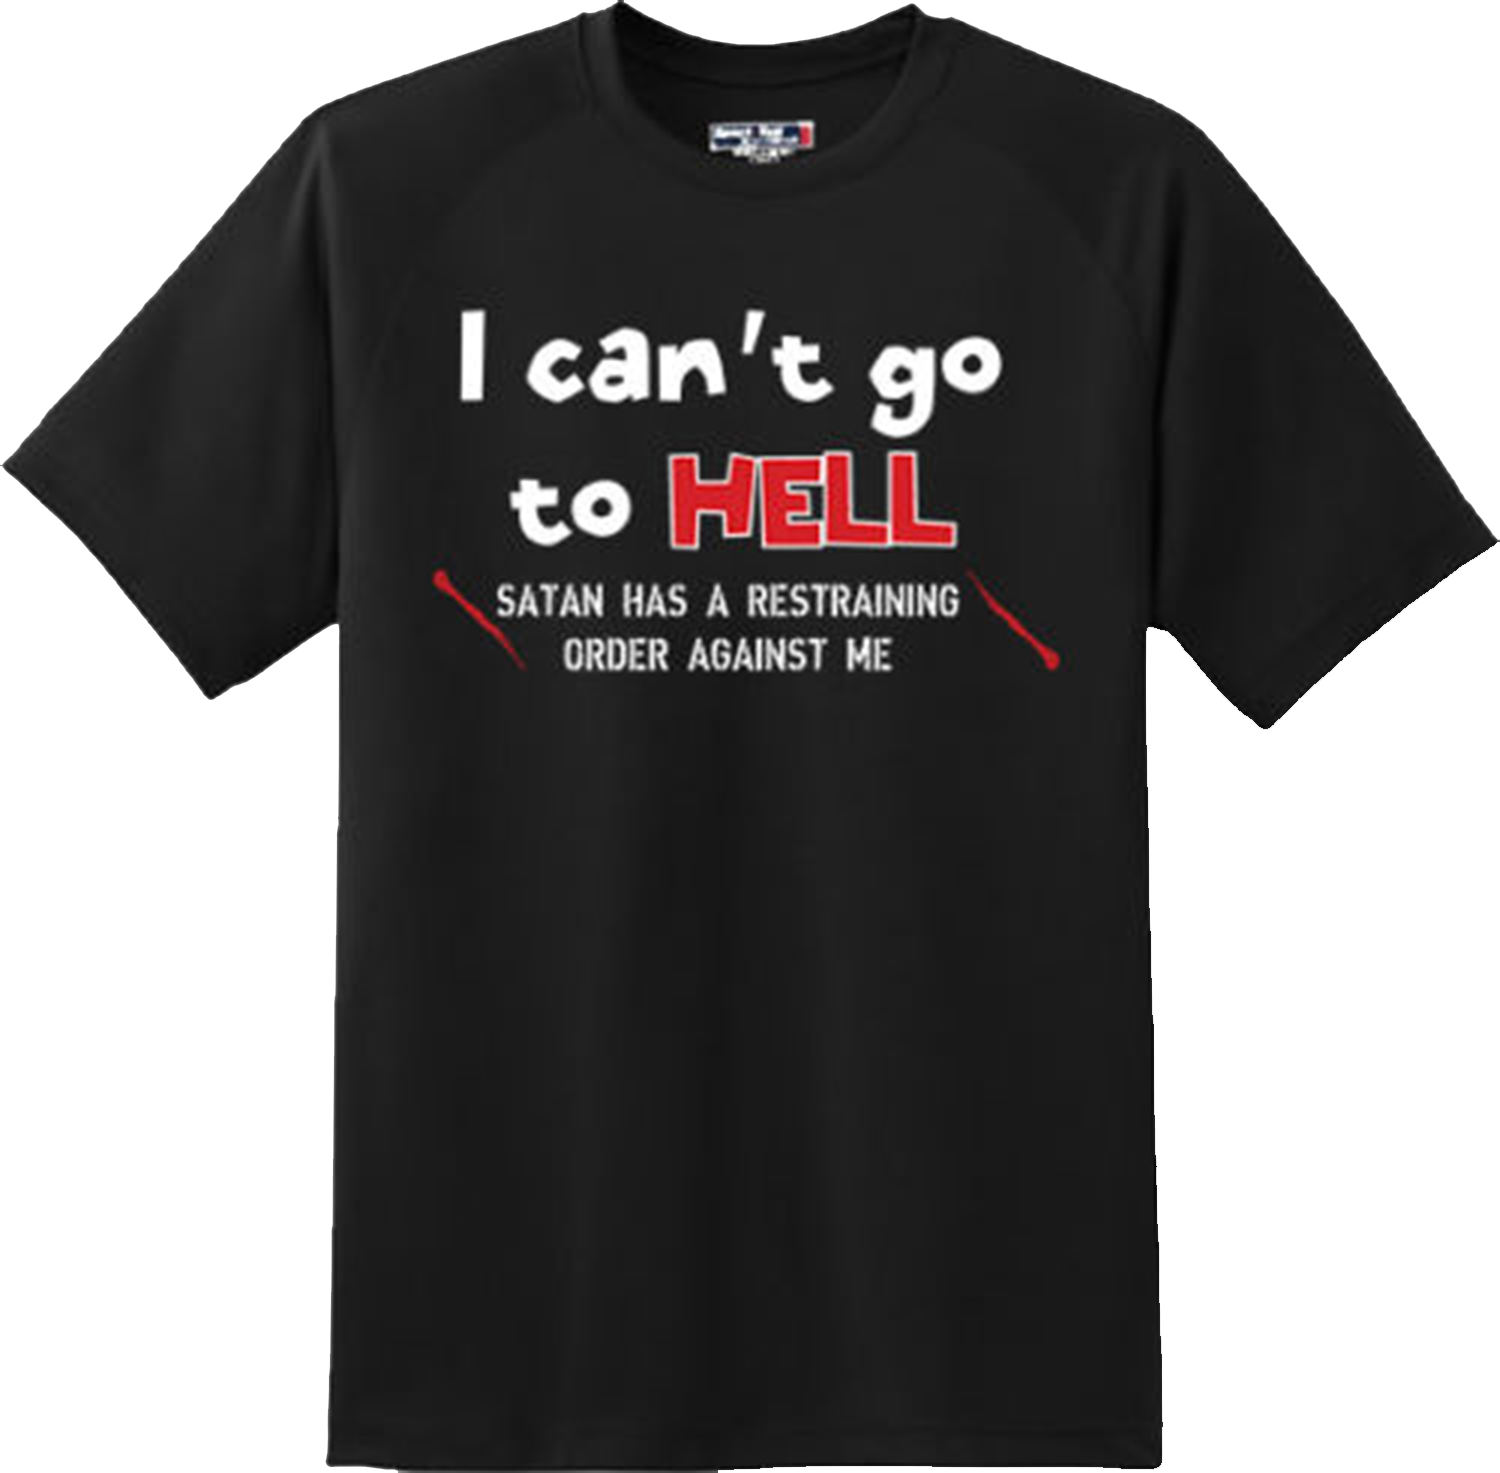 Funny I Can't go to hell Satan Religious Humor Gift TShirt New Graphic Tee